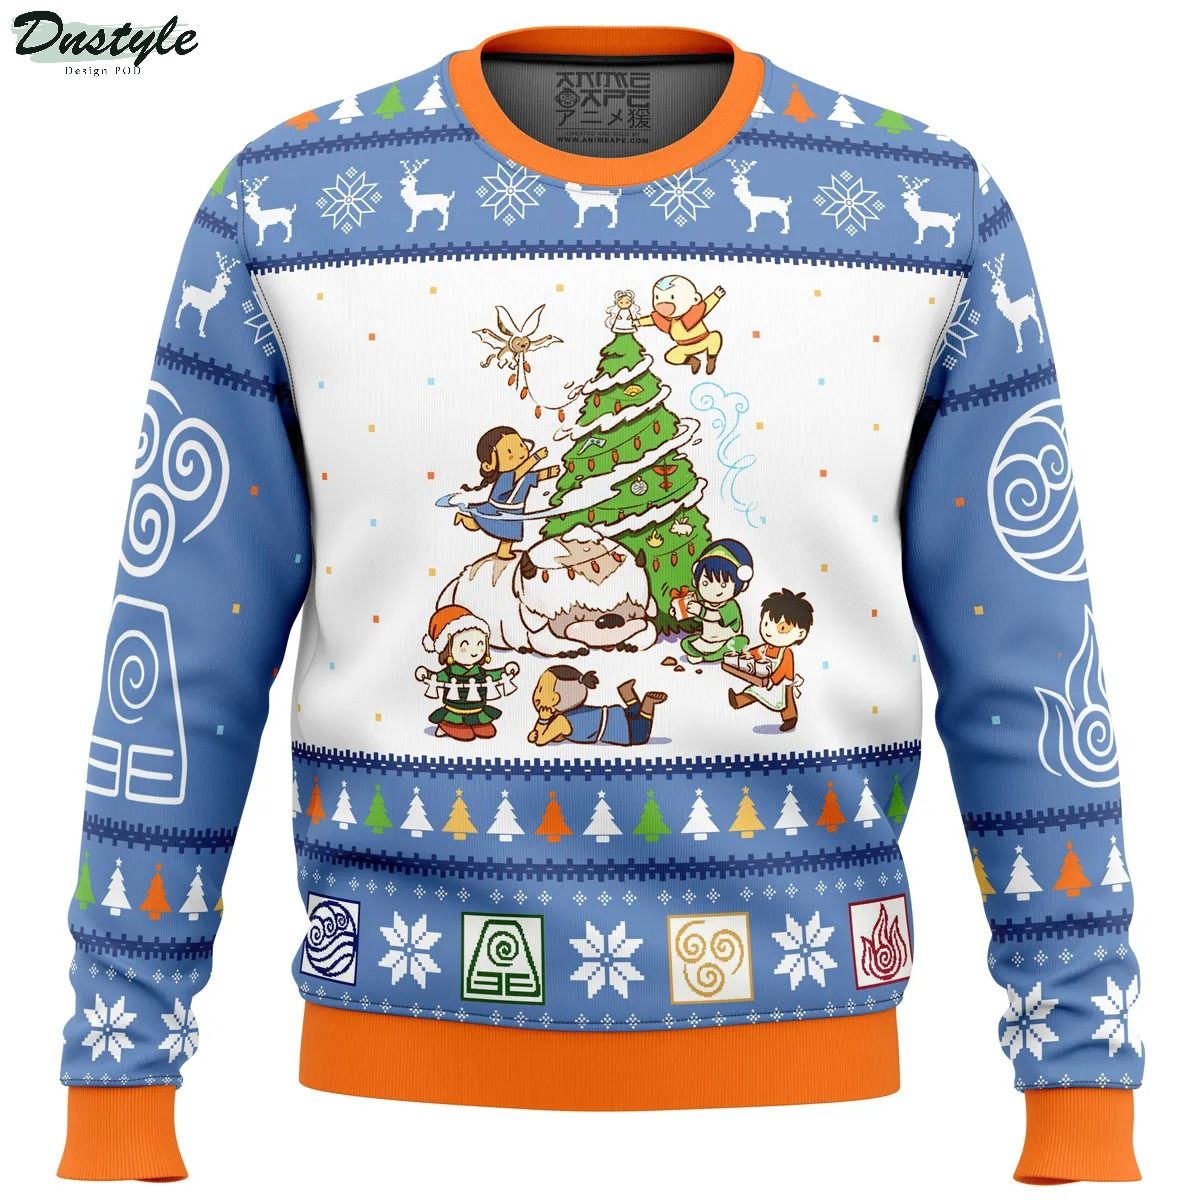 Avatar the Last Airbender Christmas Time Ugly Christmas Sweater